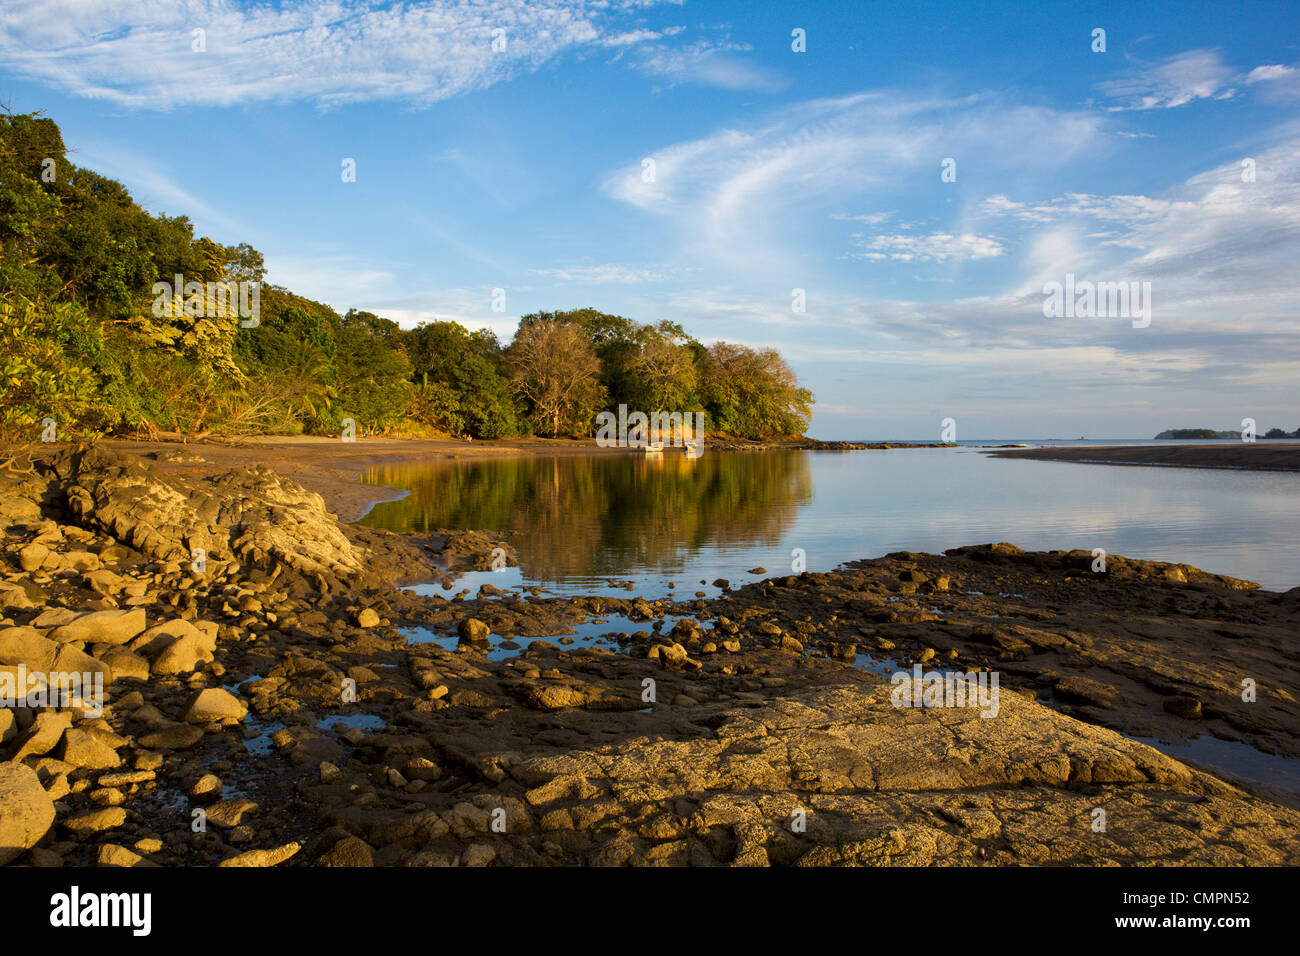 Calm bay on the island of Boca Chica in the Chiriqui Marine National Park, Panama, Central America Stock Photo